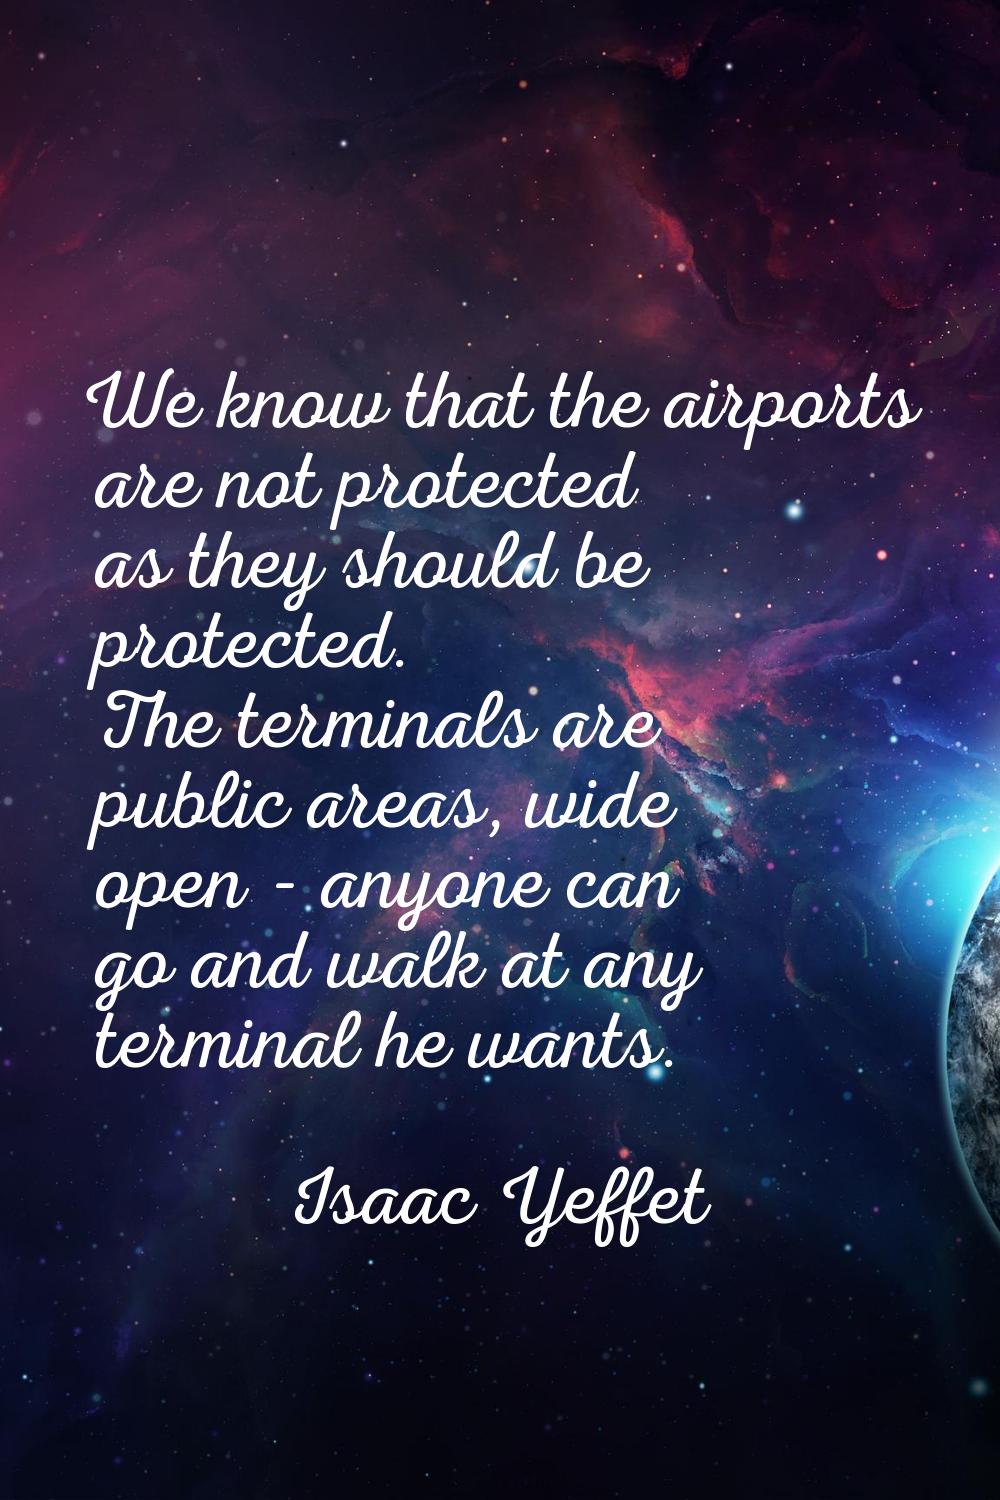 We know that the airports are not protected as they should be protected. The terminals are public a